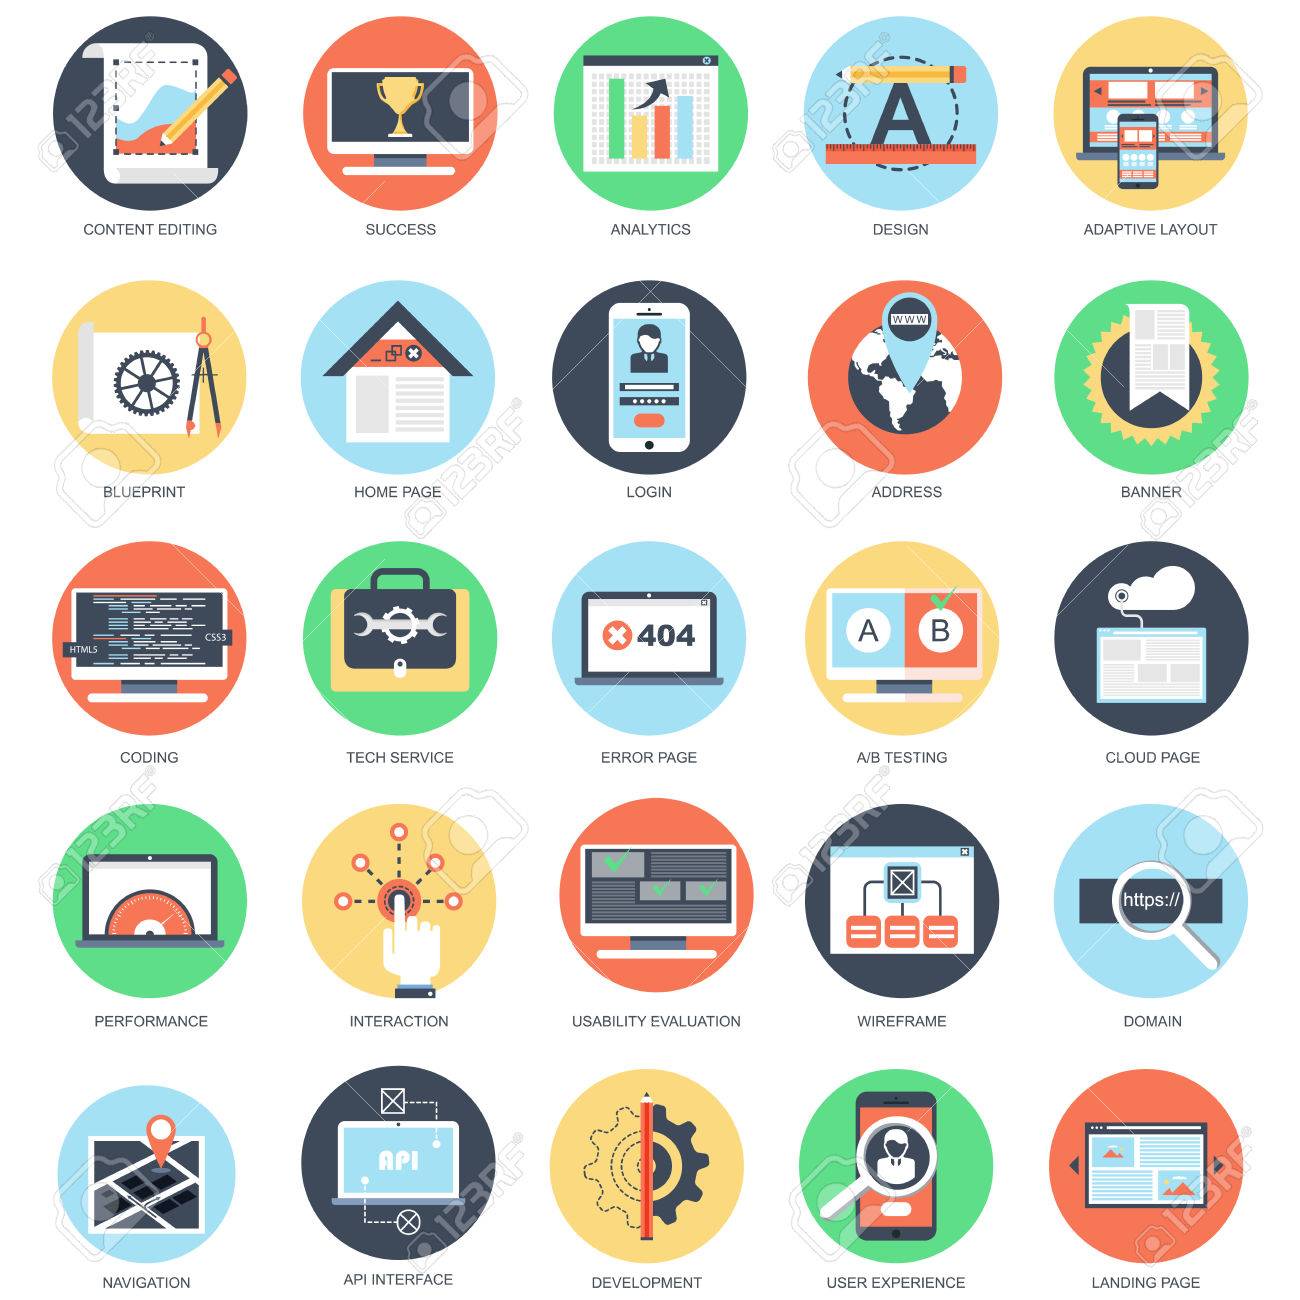 30 Free Icon Sets for Web Designers Worth Checking Out 